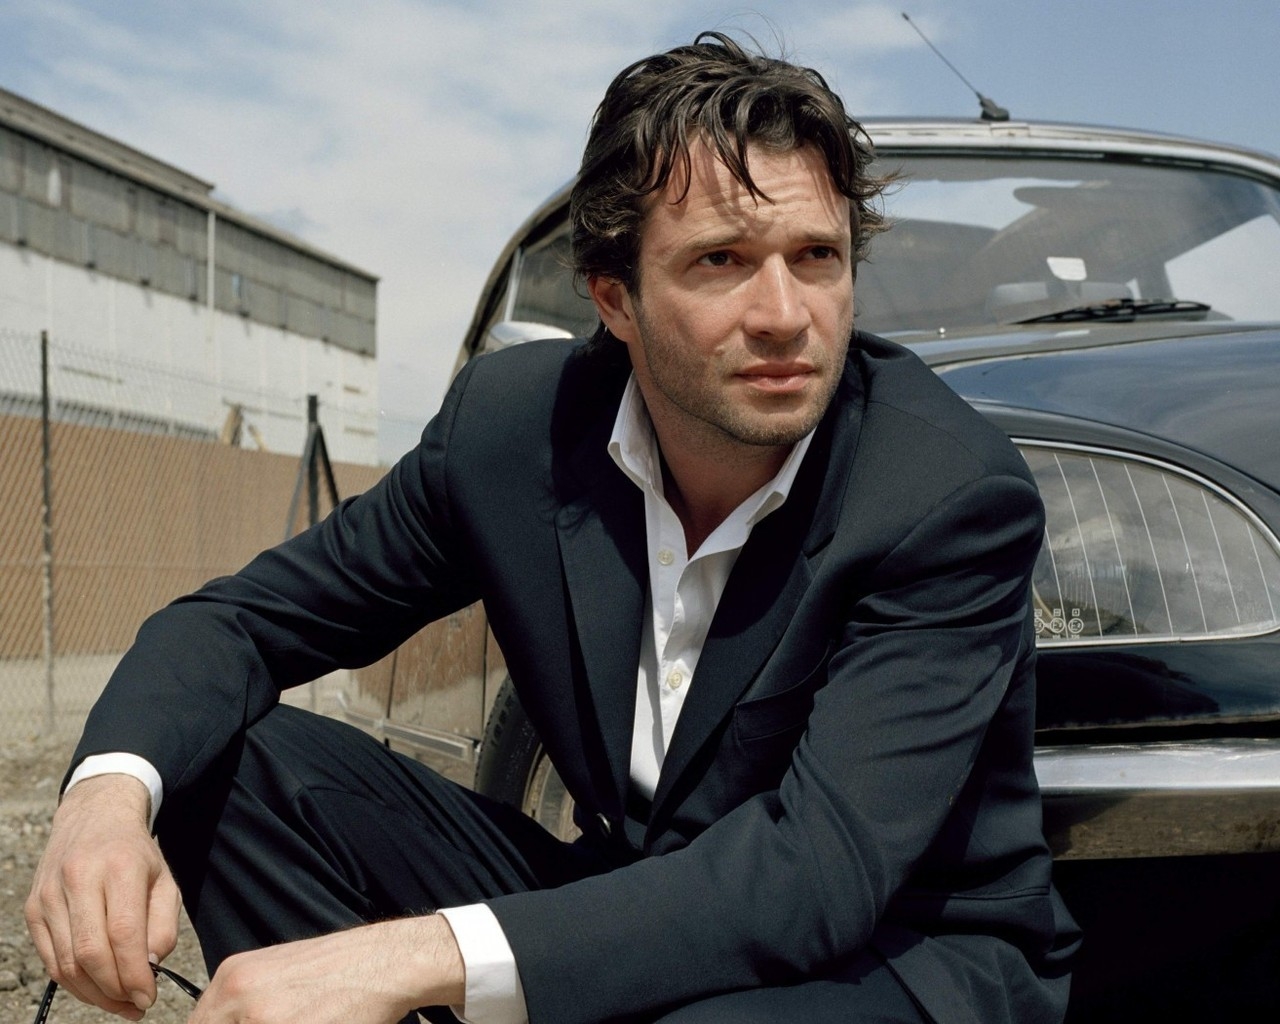 James Purefoy in a Black Suit for 1280 x 1024 resolution